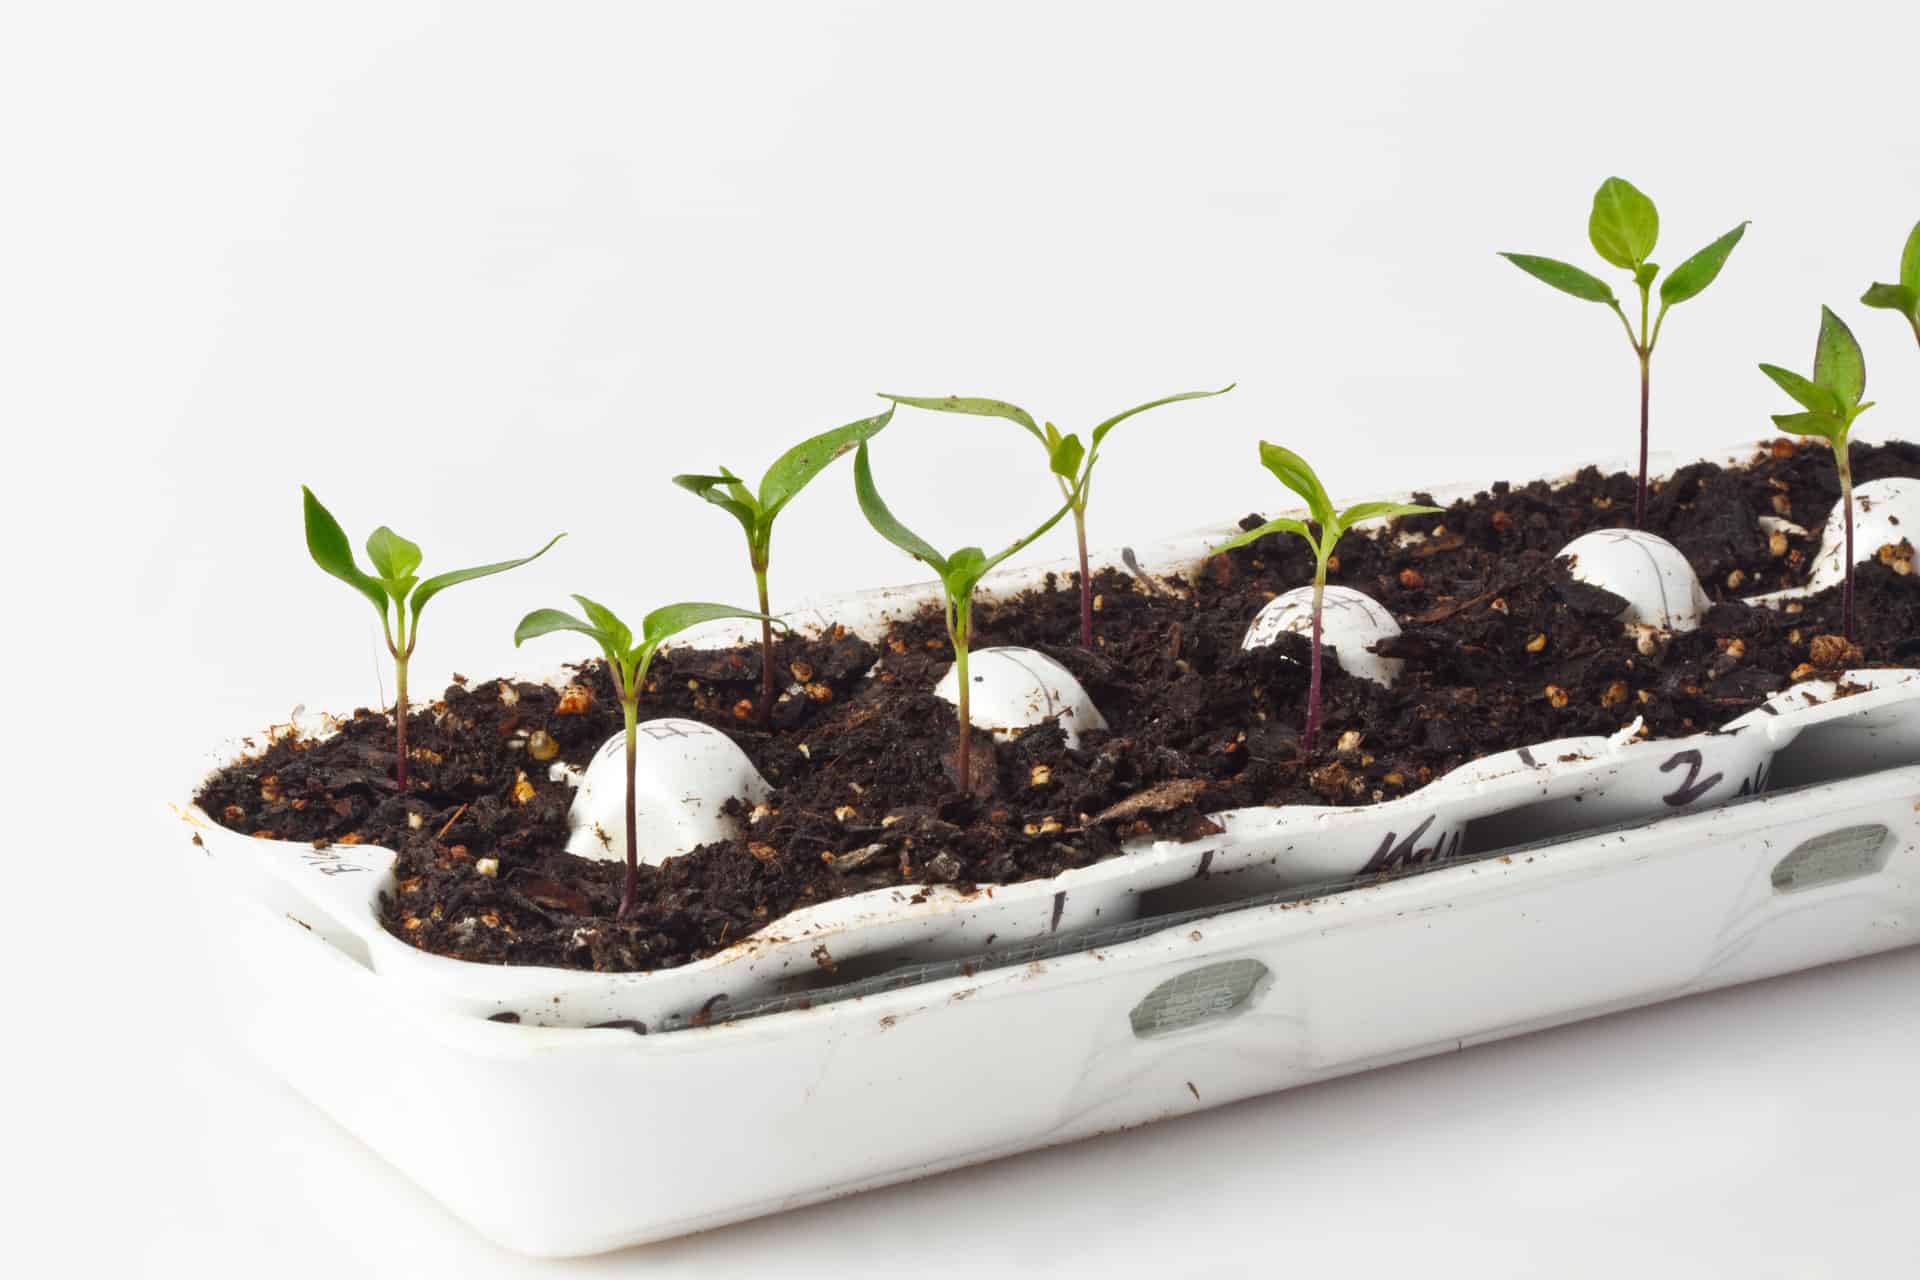 How To Use Egg Cartons To Start Seeds